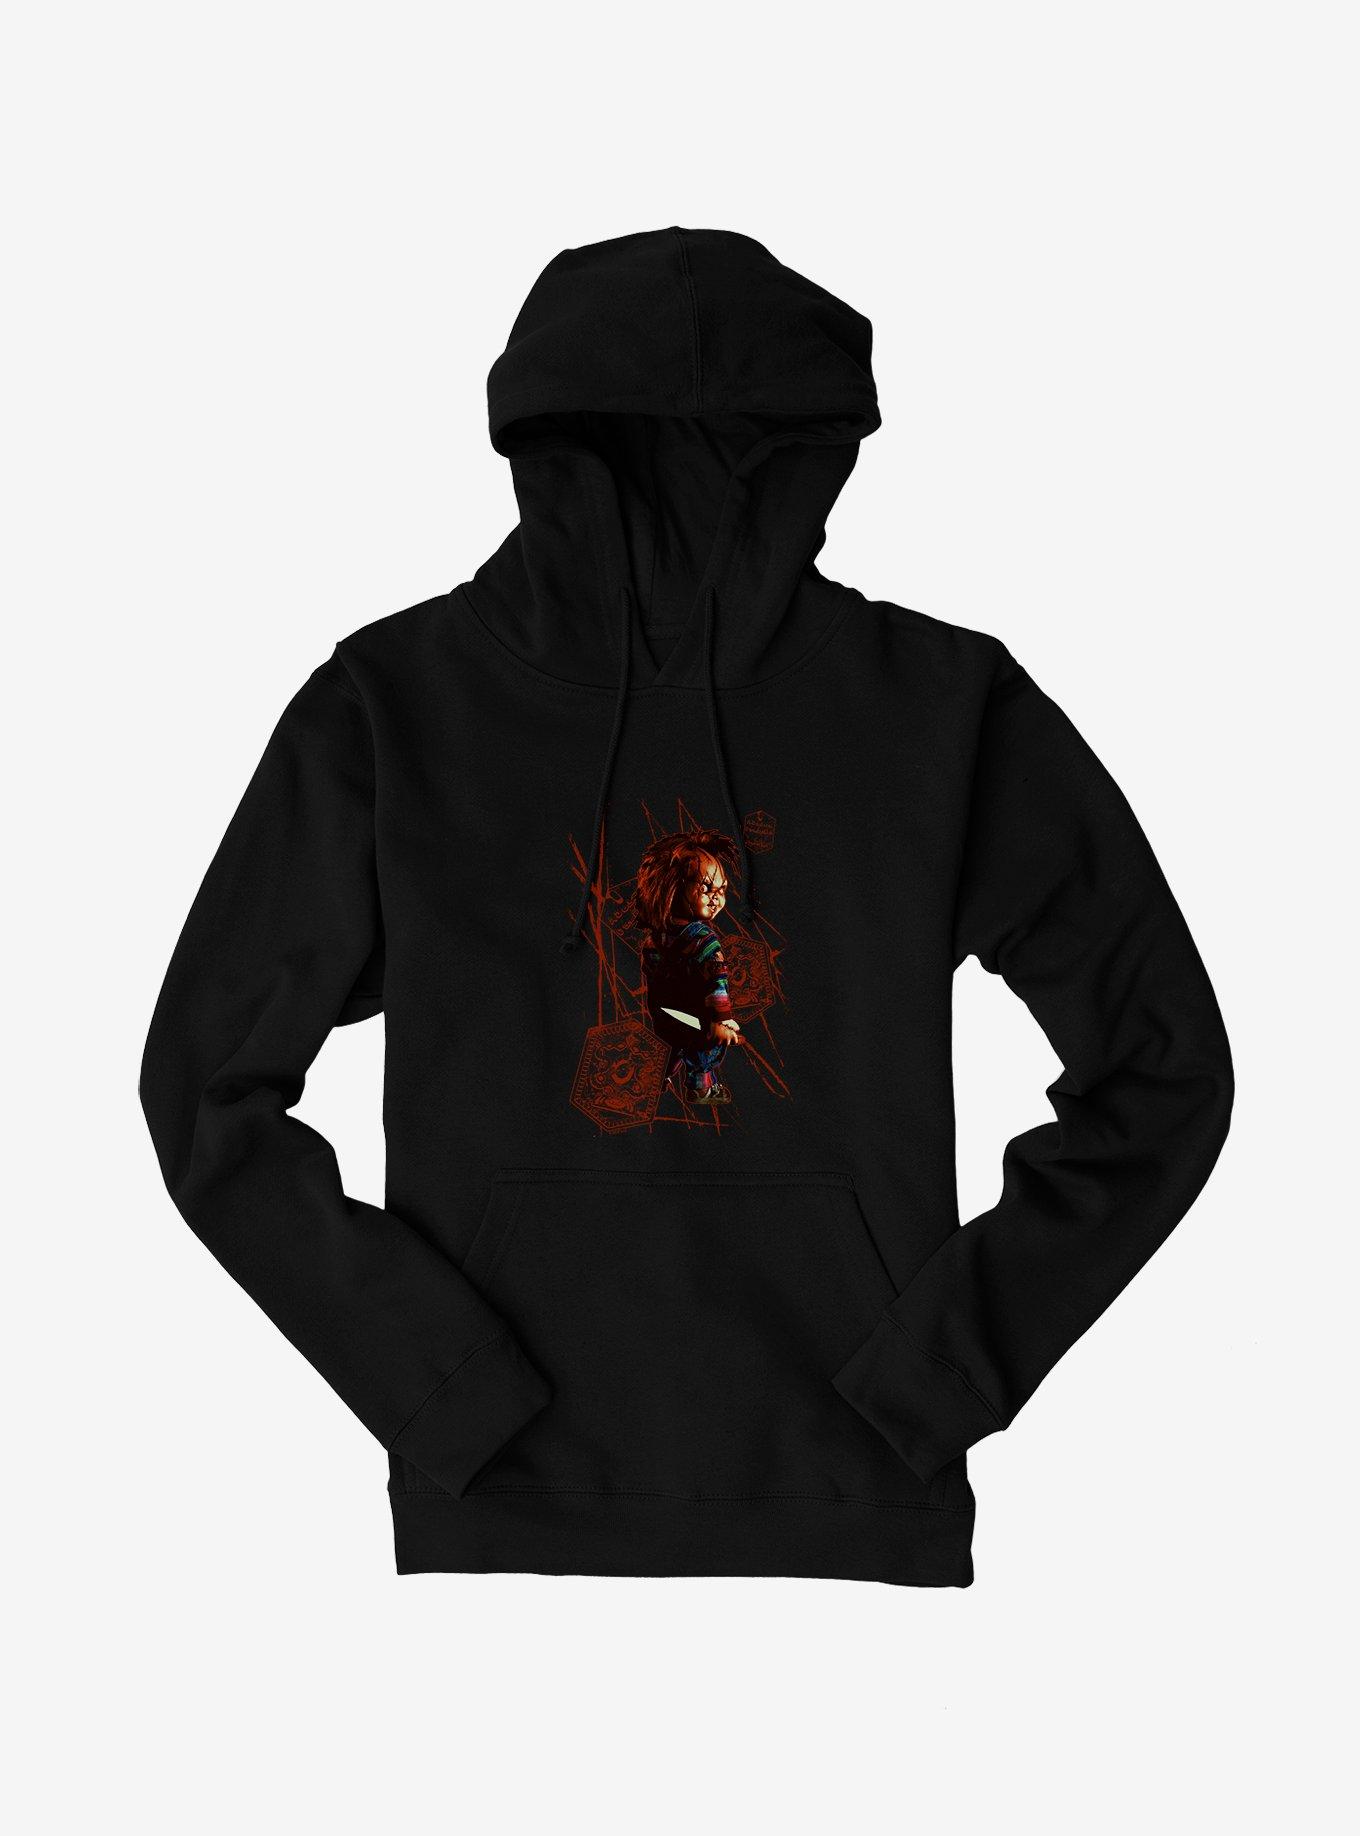 Chucky Holding Knife Hoodie, , hi-res